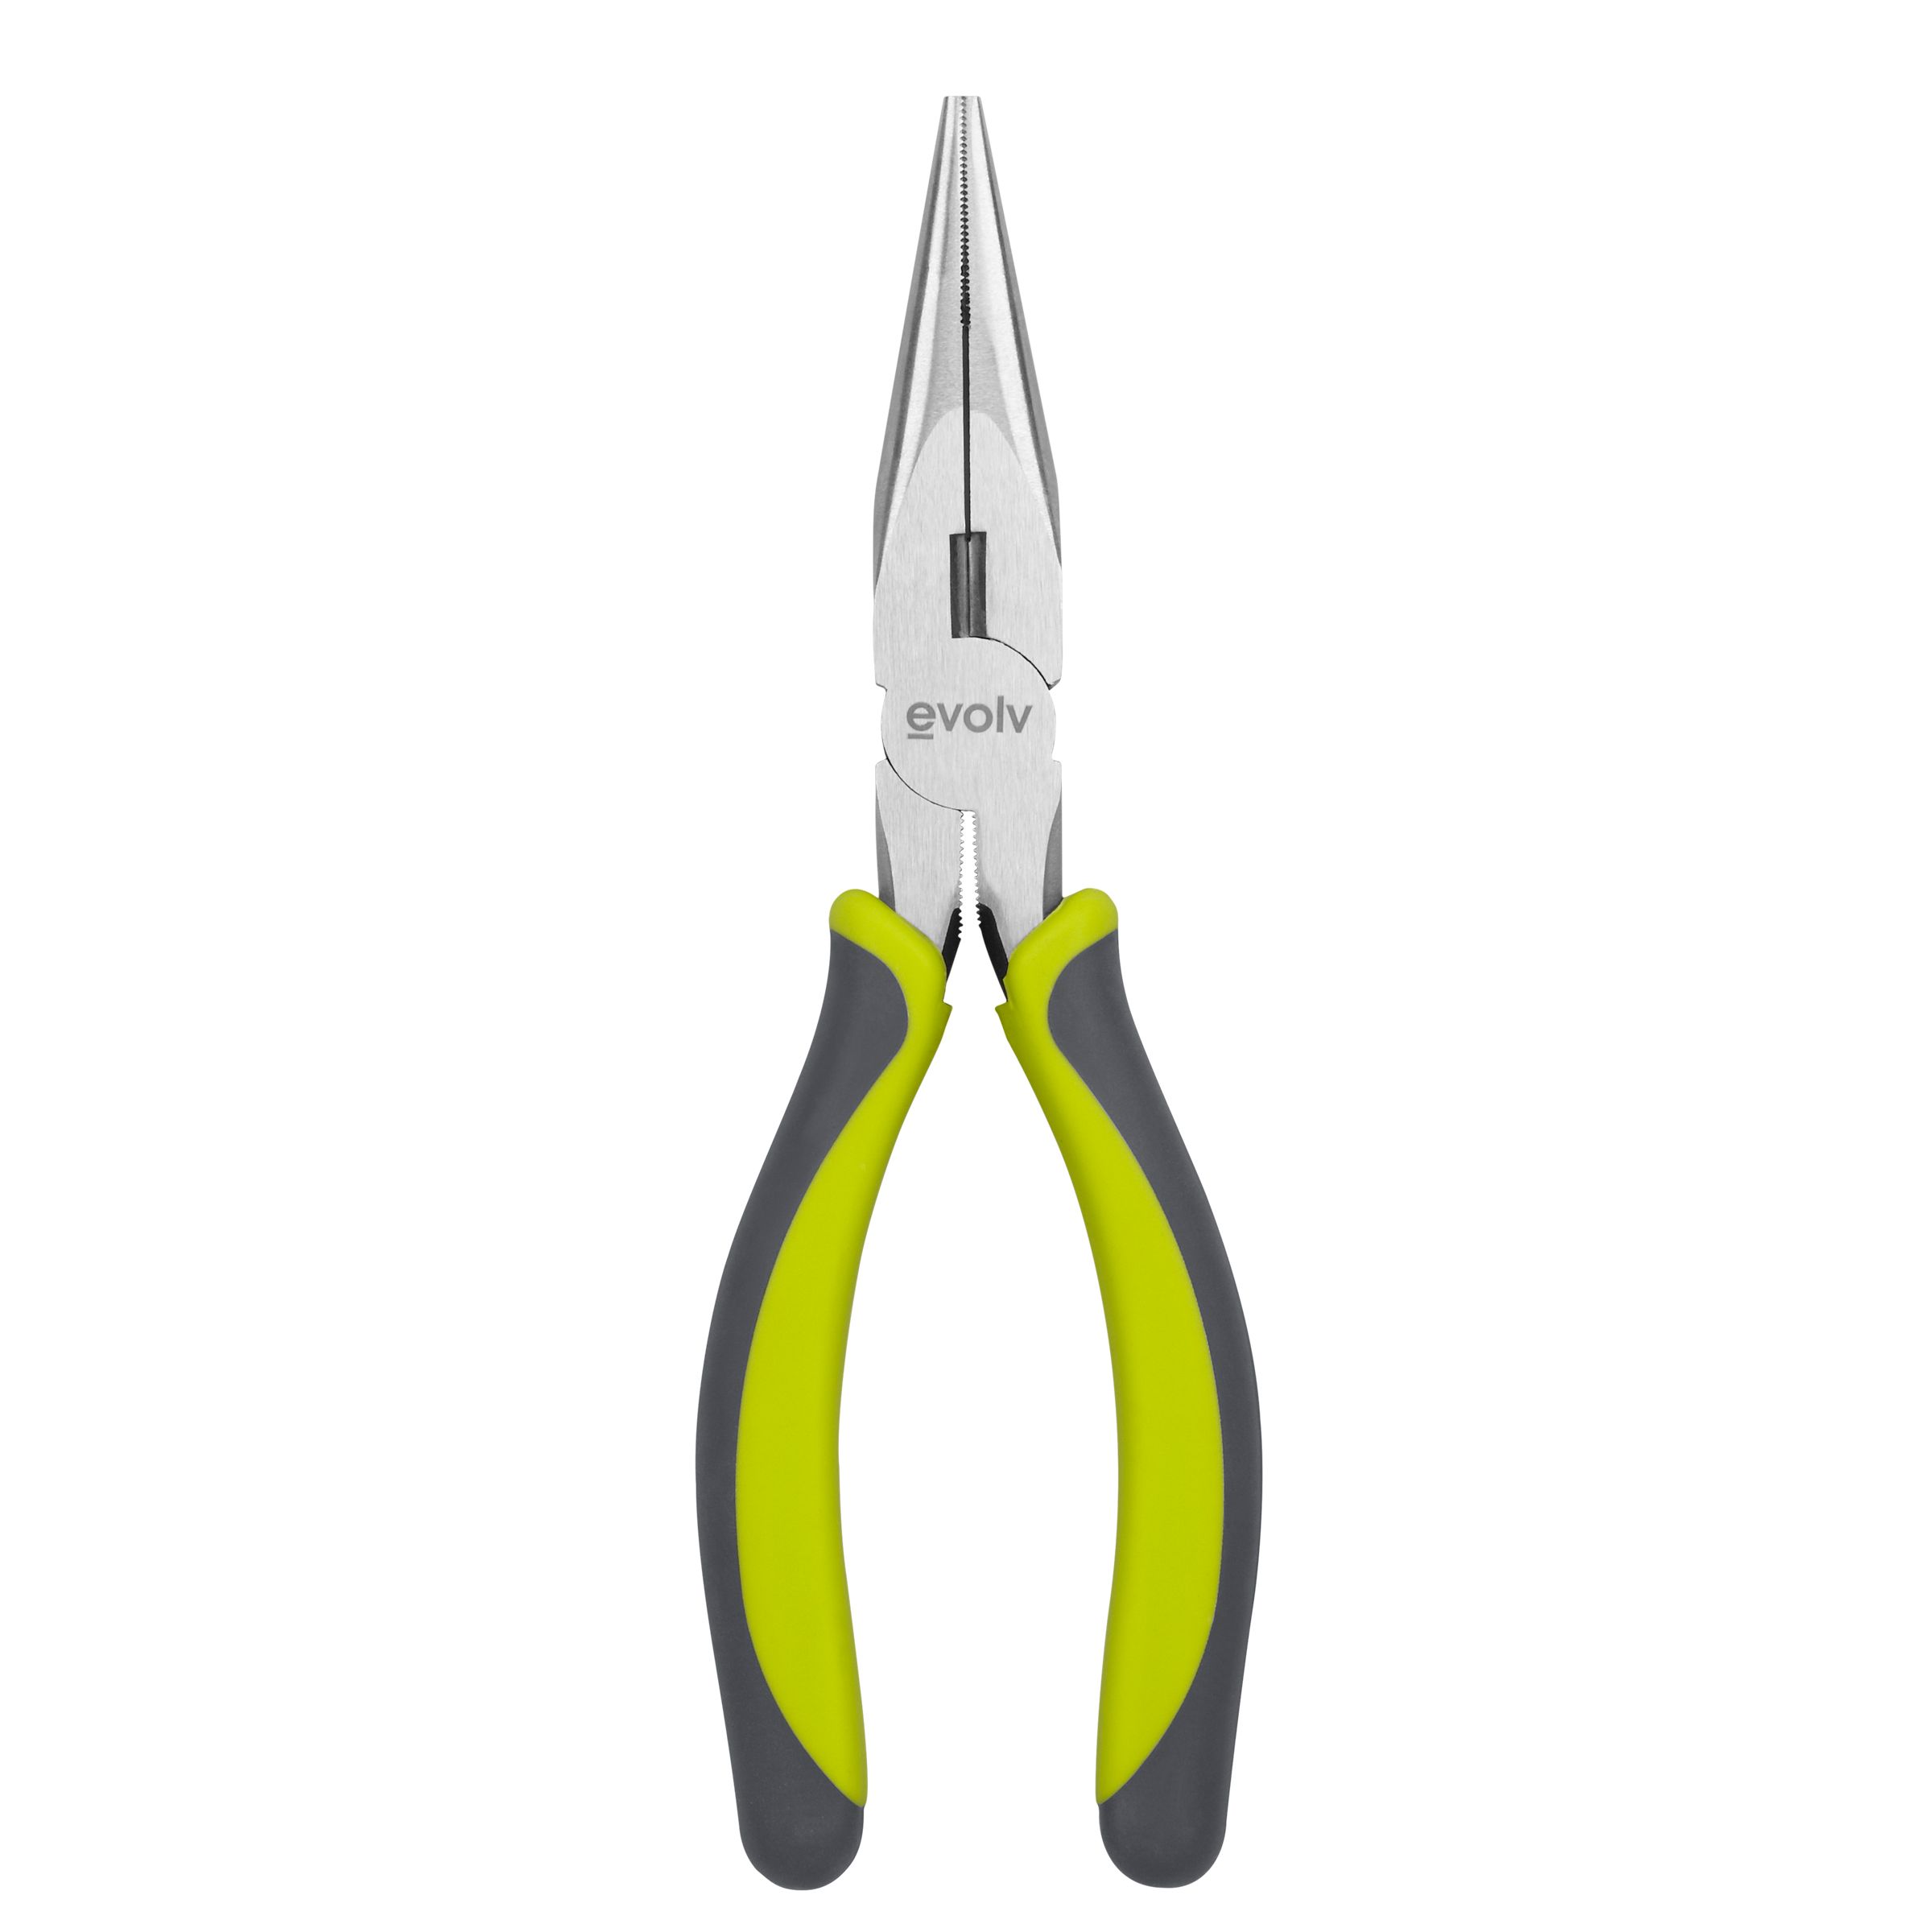 Craftsman Evolv 8 in. Long Nose Pliers